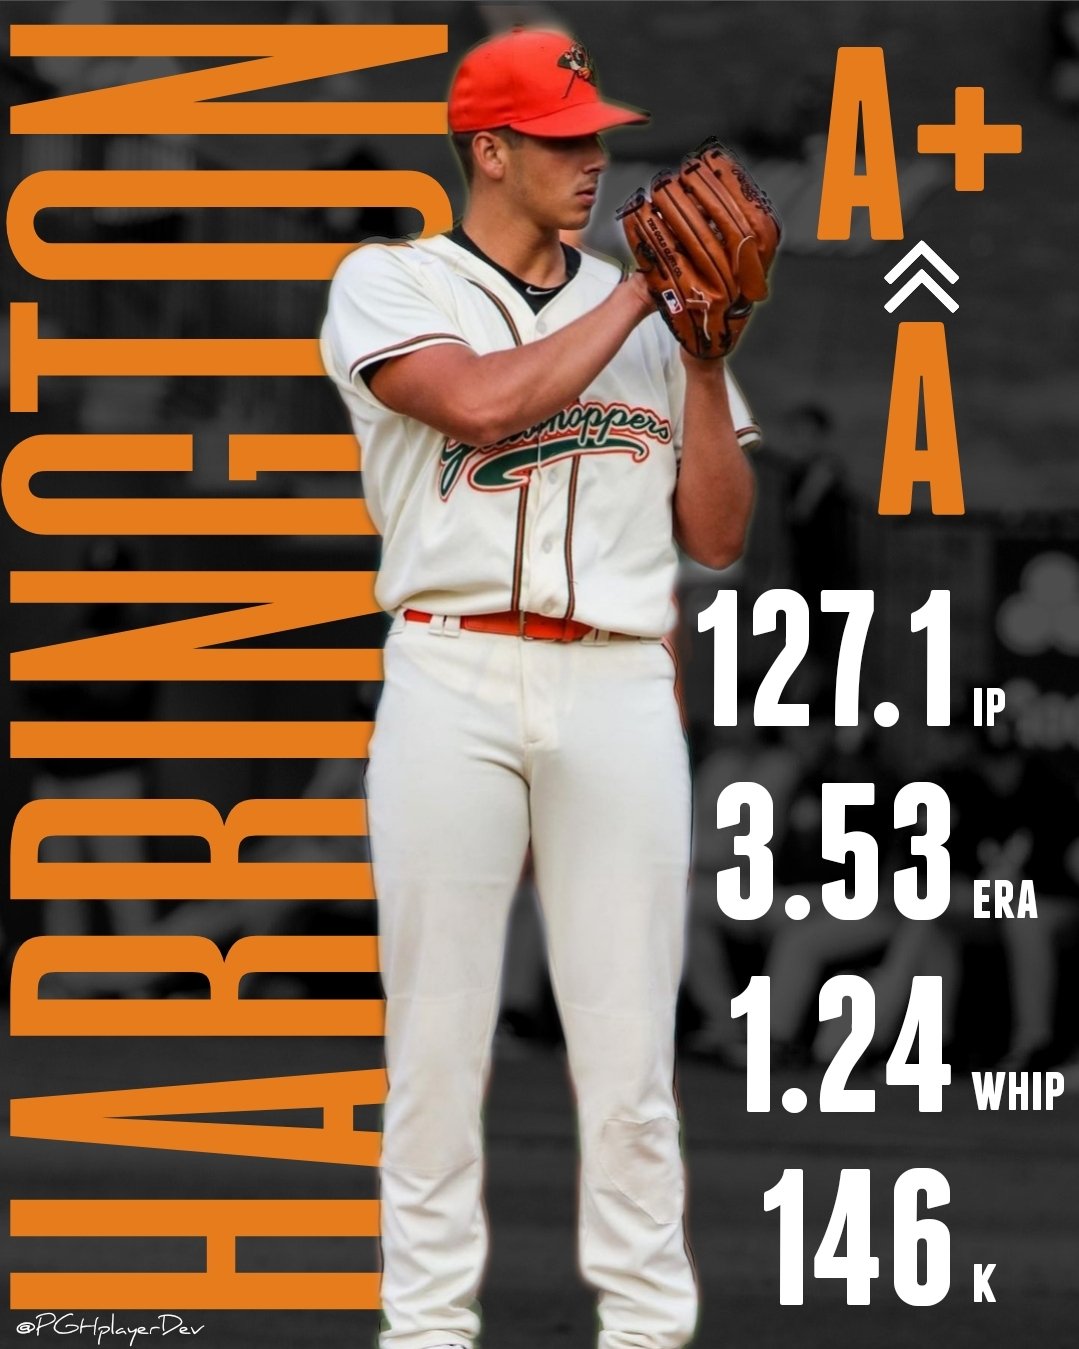 Harrington drafted 36th overall by Pittsburgh Pirates - Campbell University